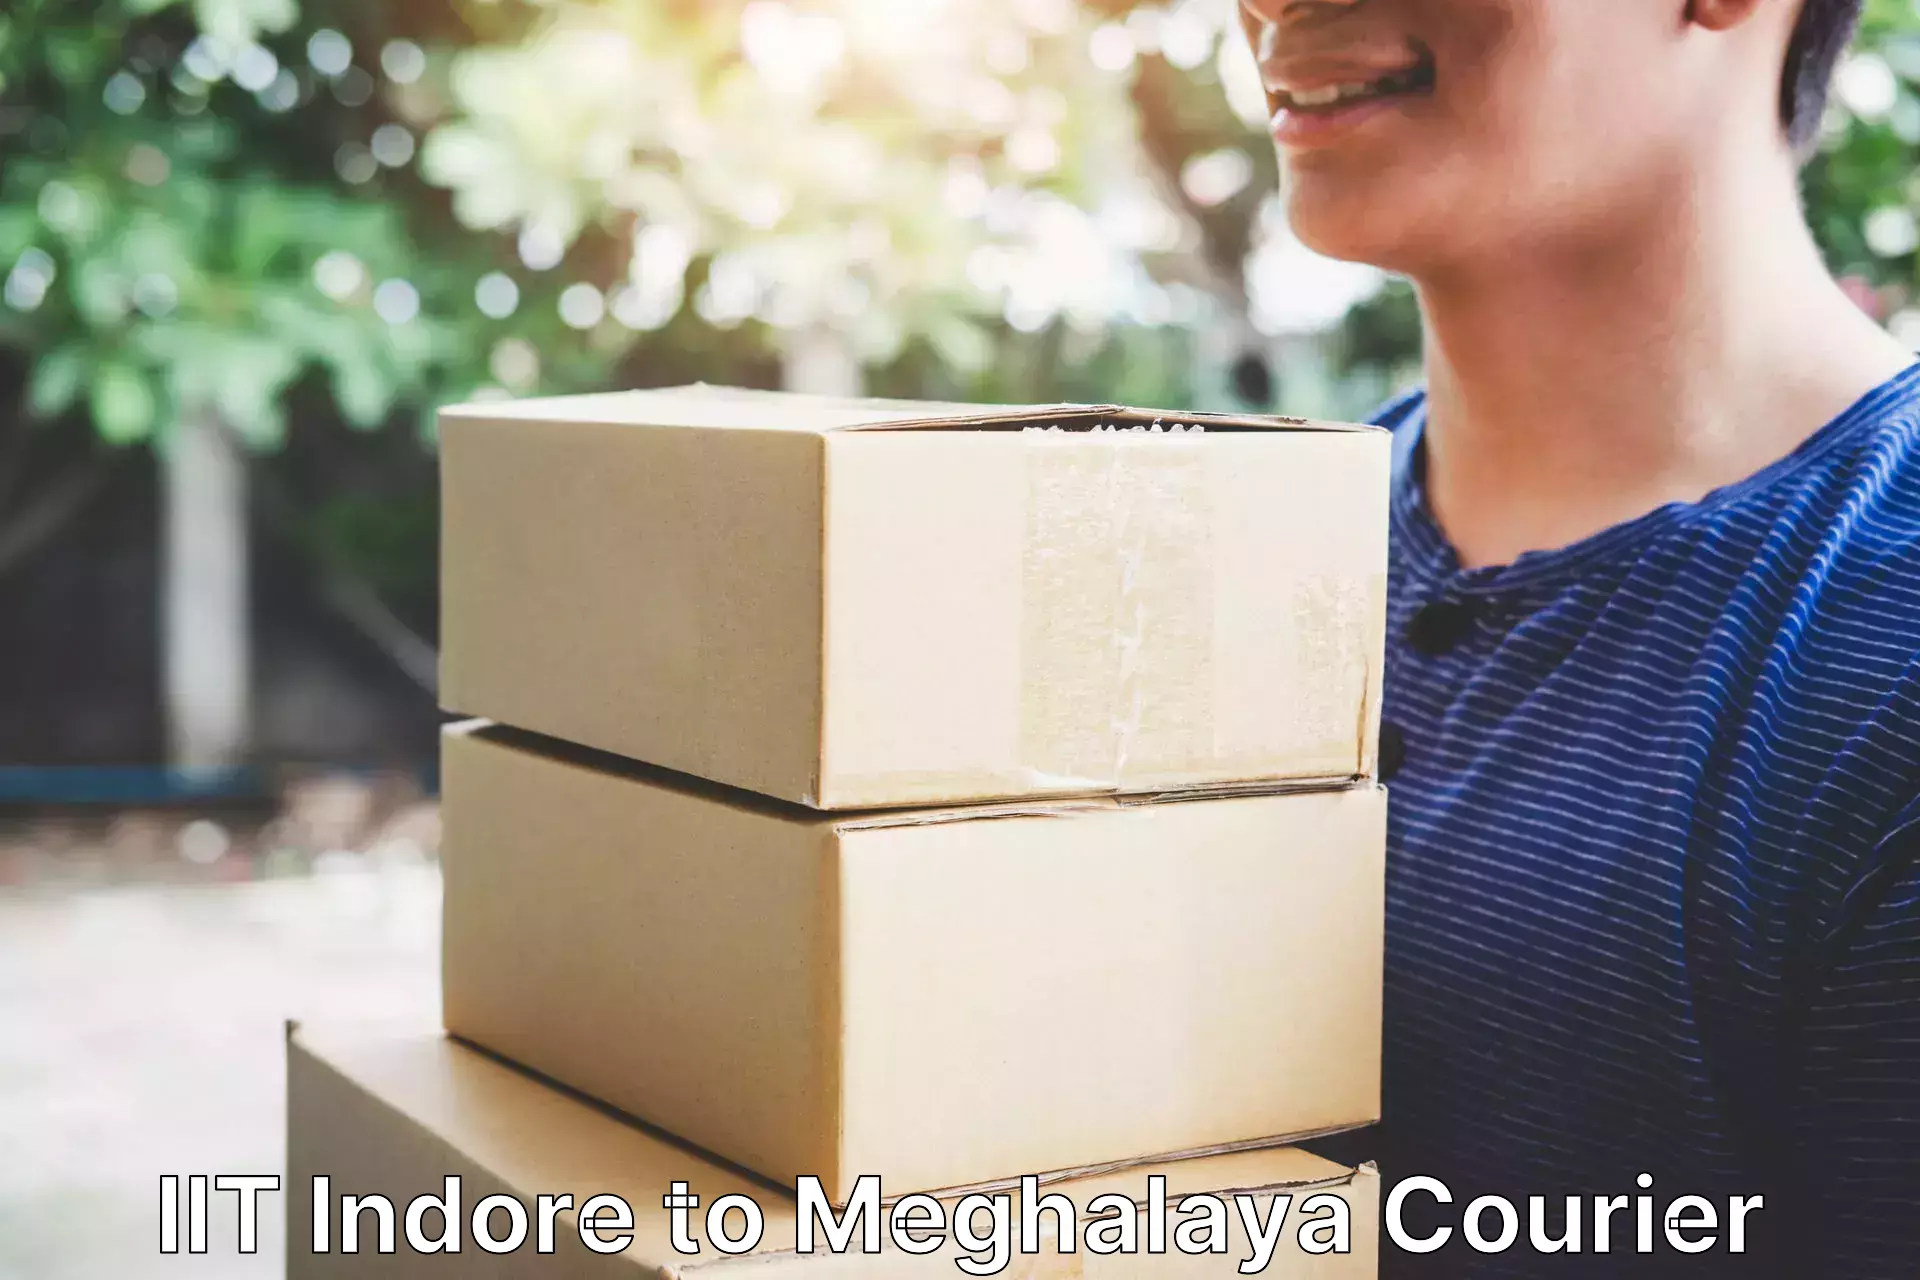 Multi-service courier options IIT Indore to Meghalaya